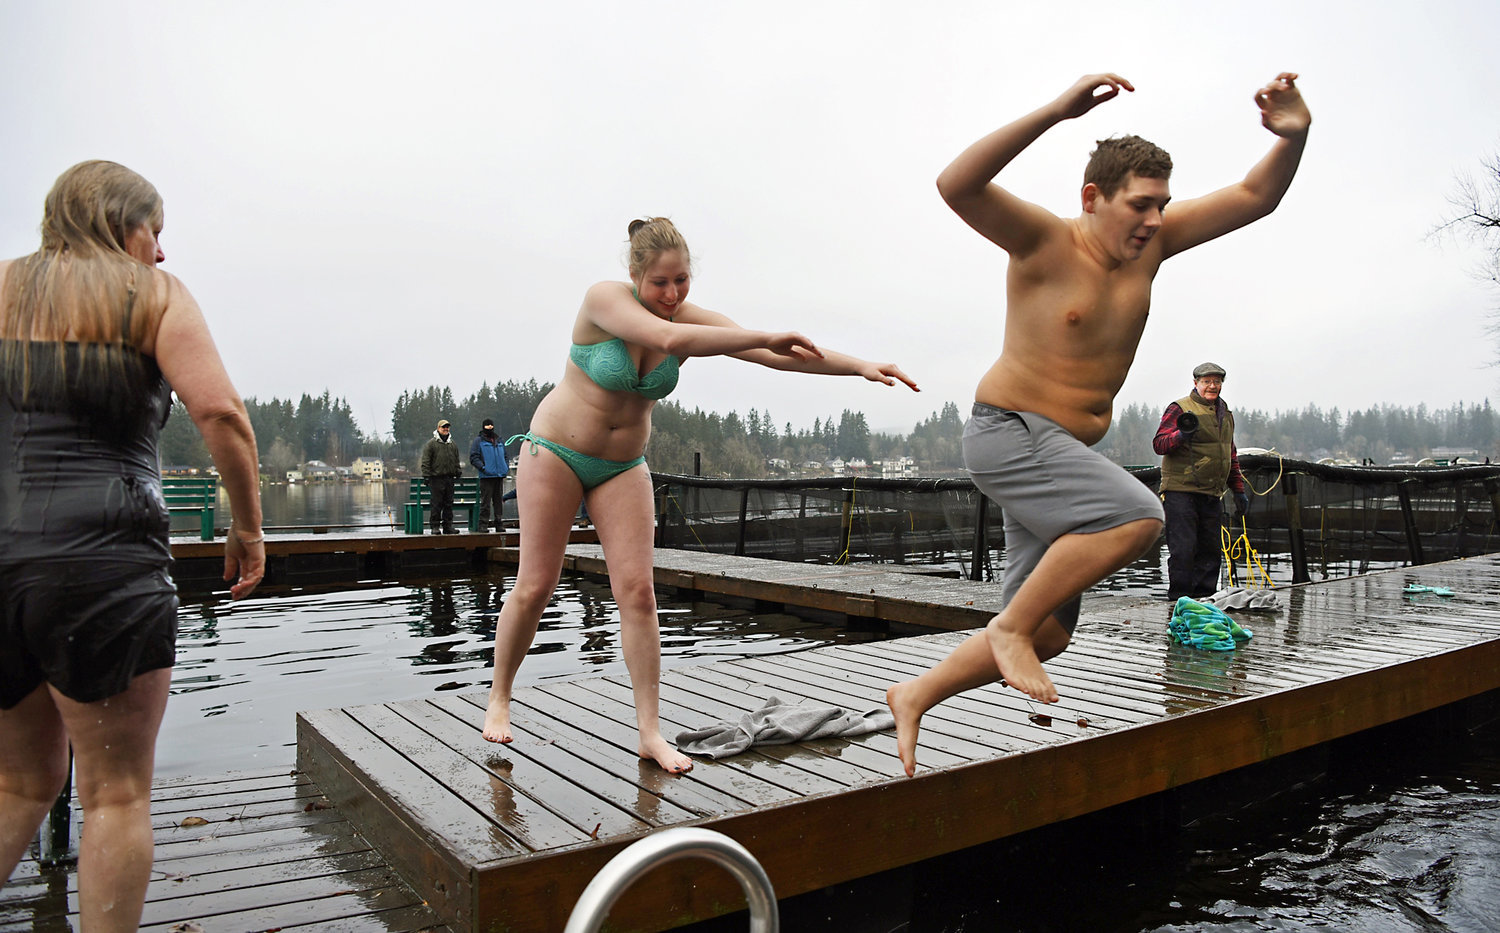 With a little help from his plungemate, a participate leaps to his fate New Year's Day during the Offut Lake Resort's annual Polar Bear Plunge in Tenino in this 2017 Chronicle file photo.